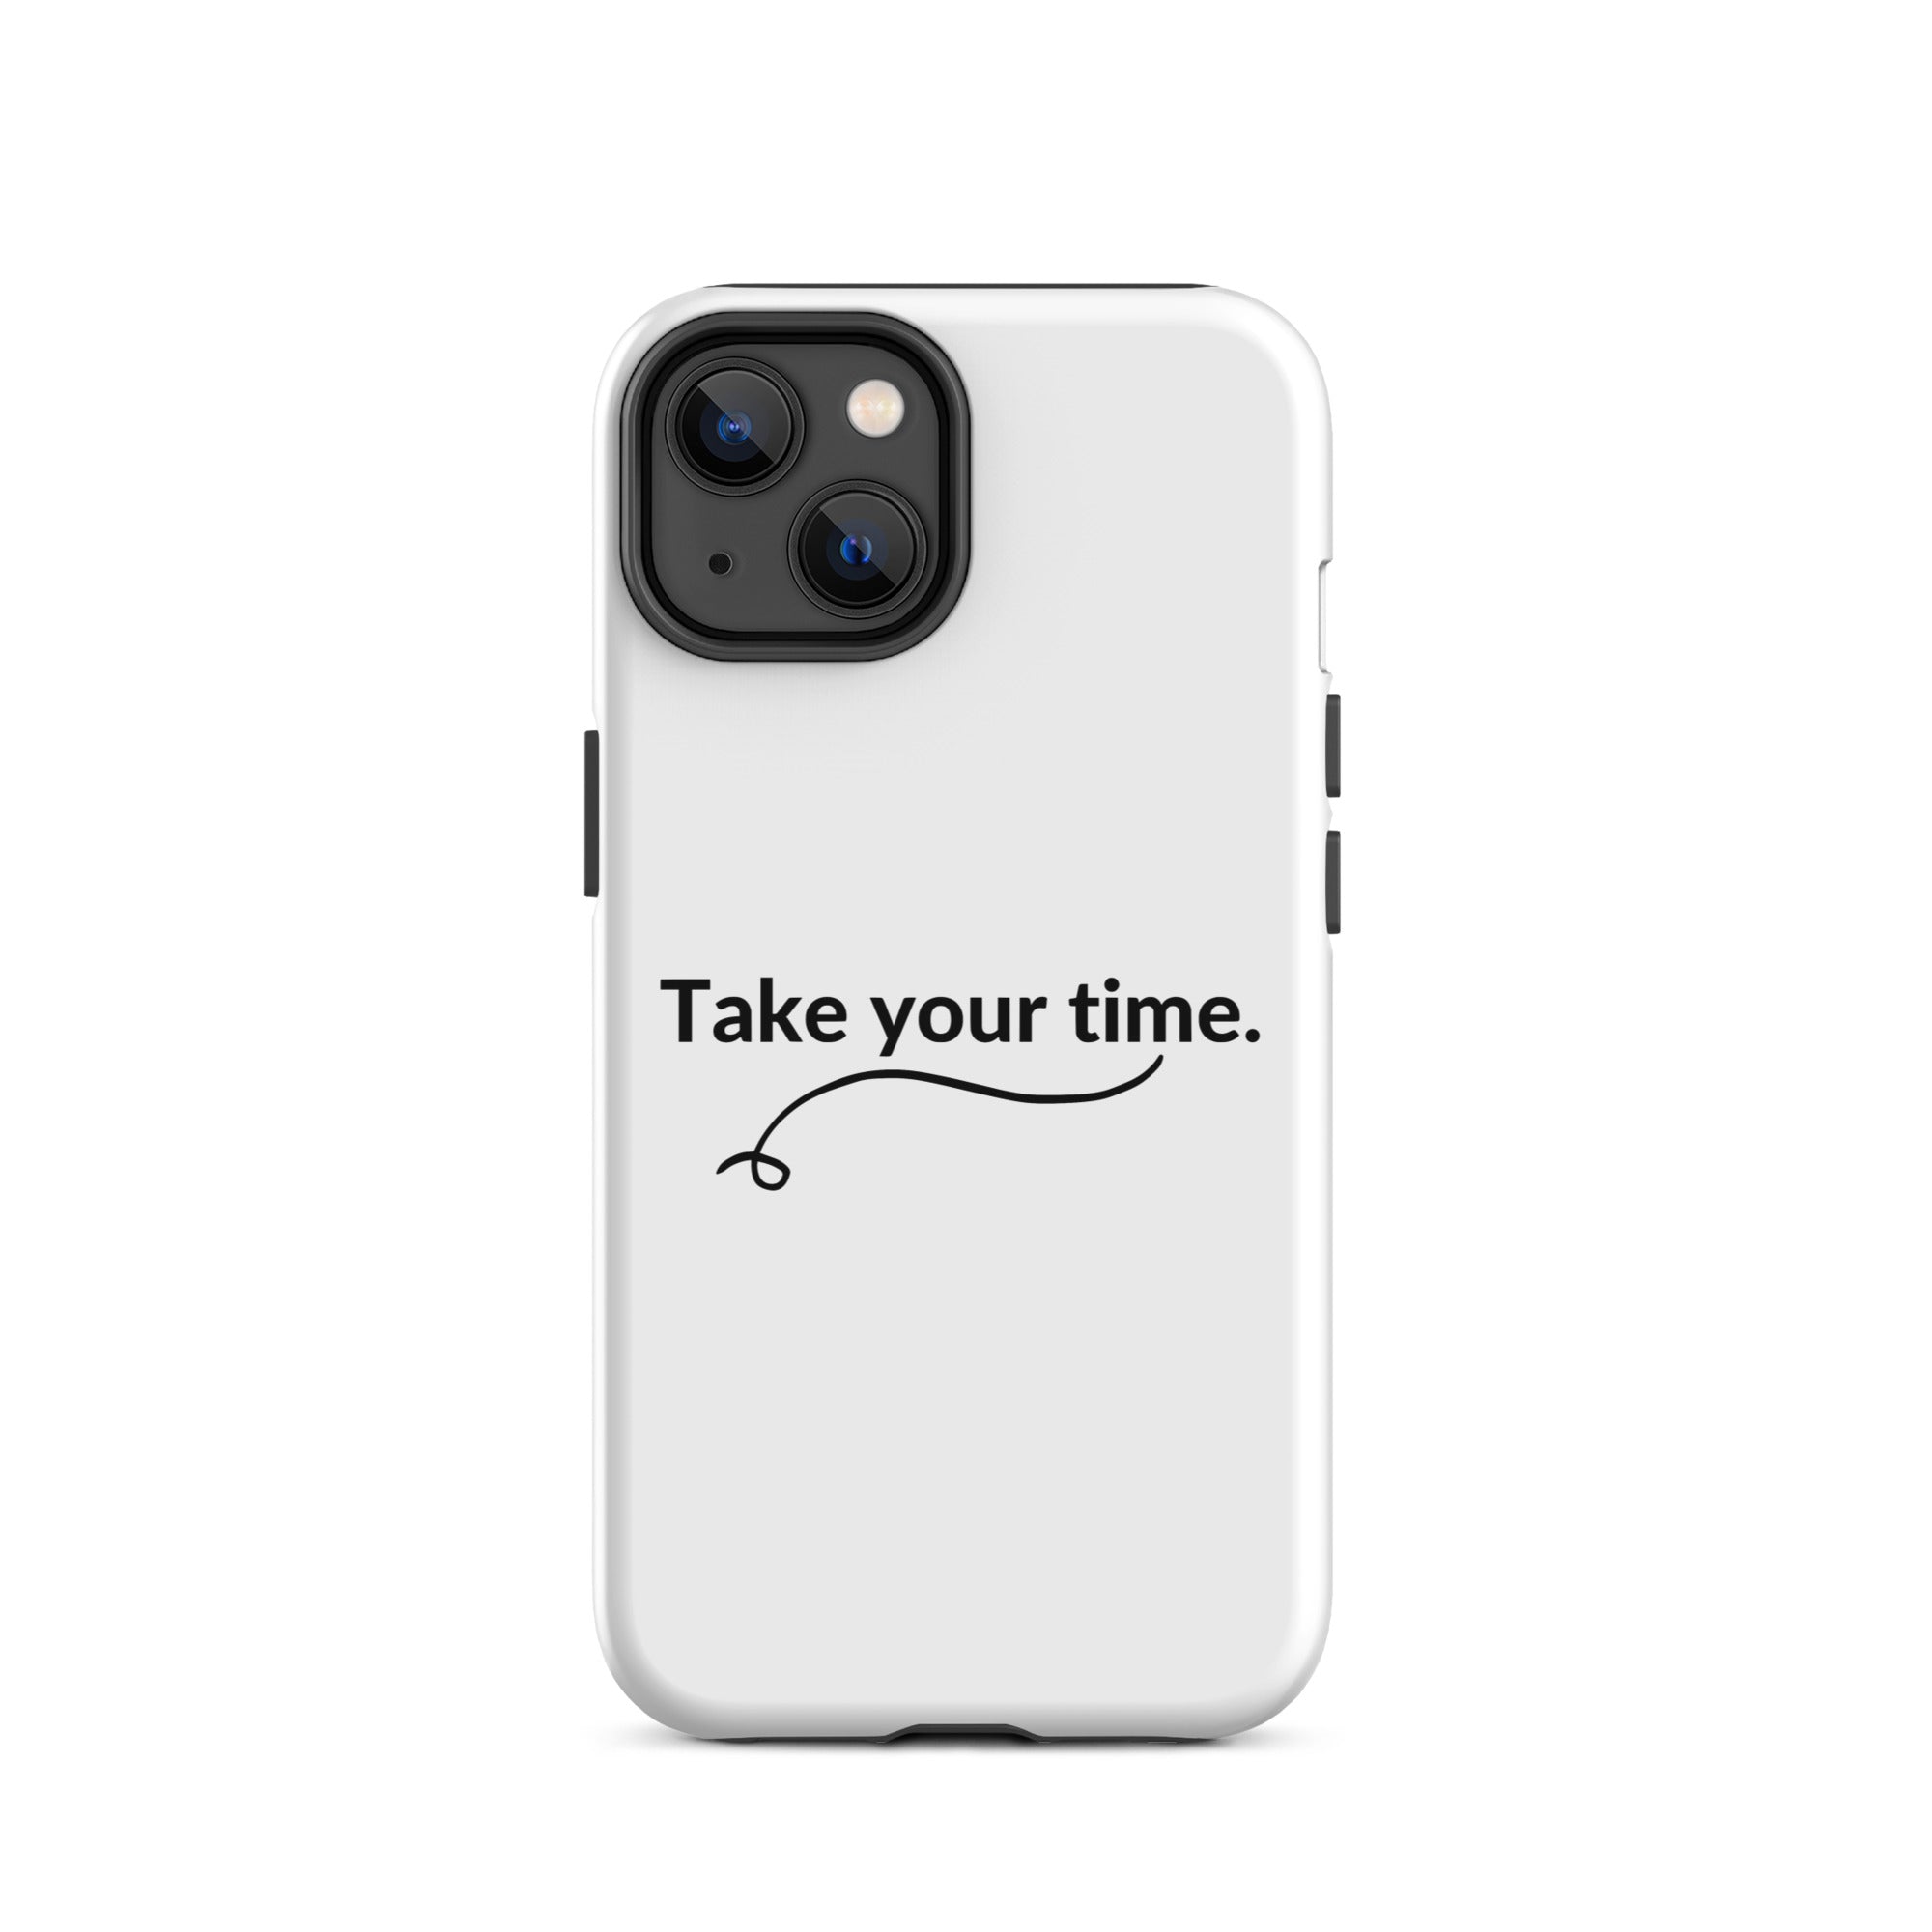 Take Your Time - Tough iPhone case